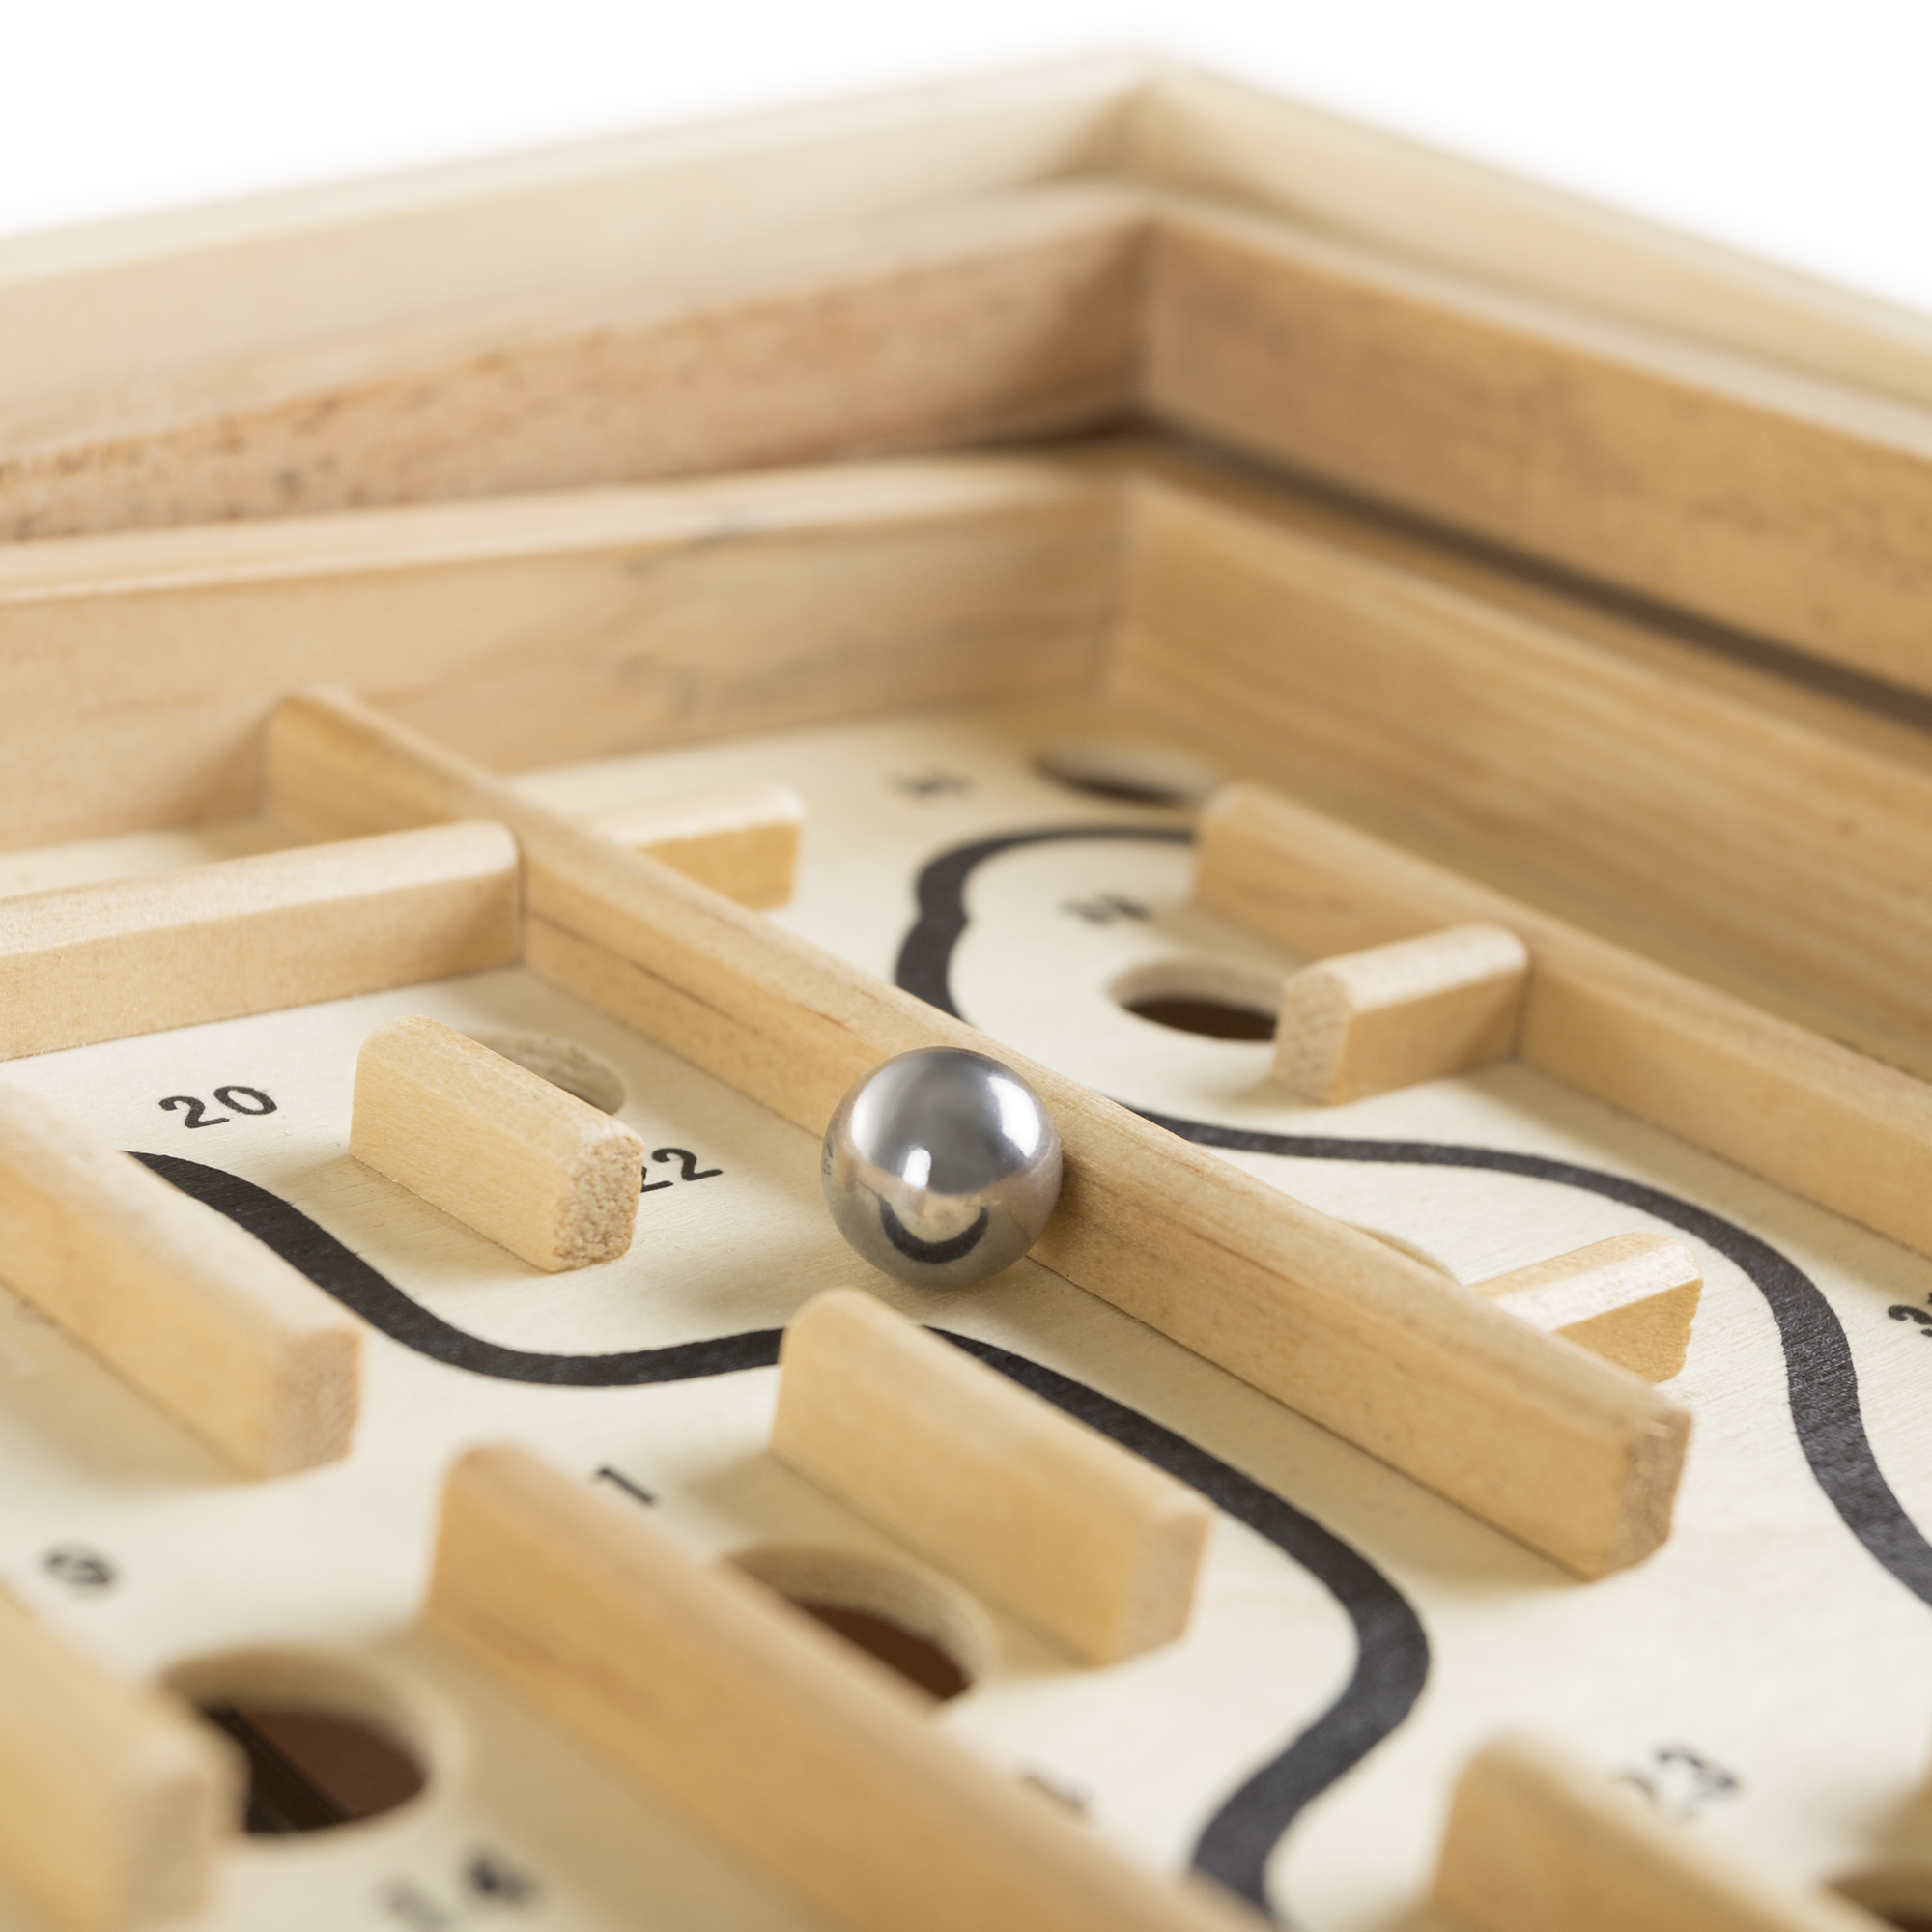 Labyrinth Wooden Maze Game with Two Steel Marbles by Hey! Play! - image 3 of 6